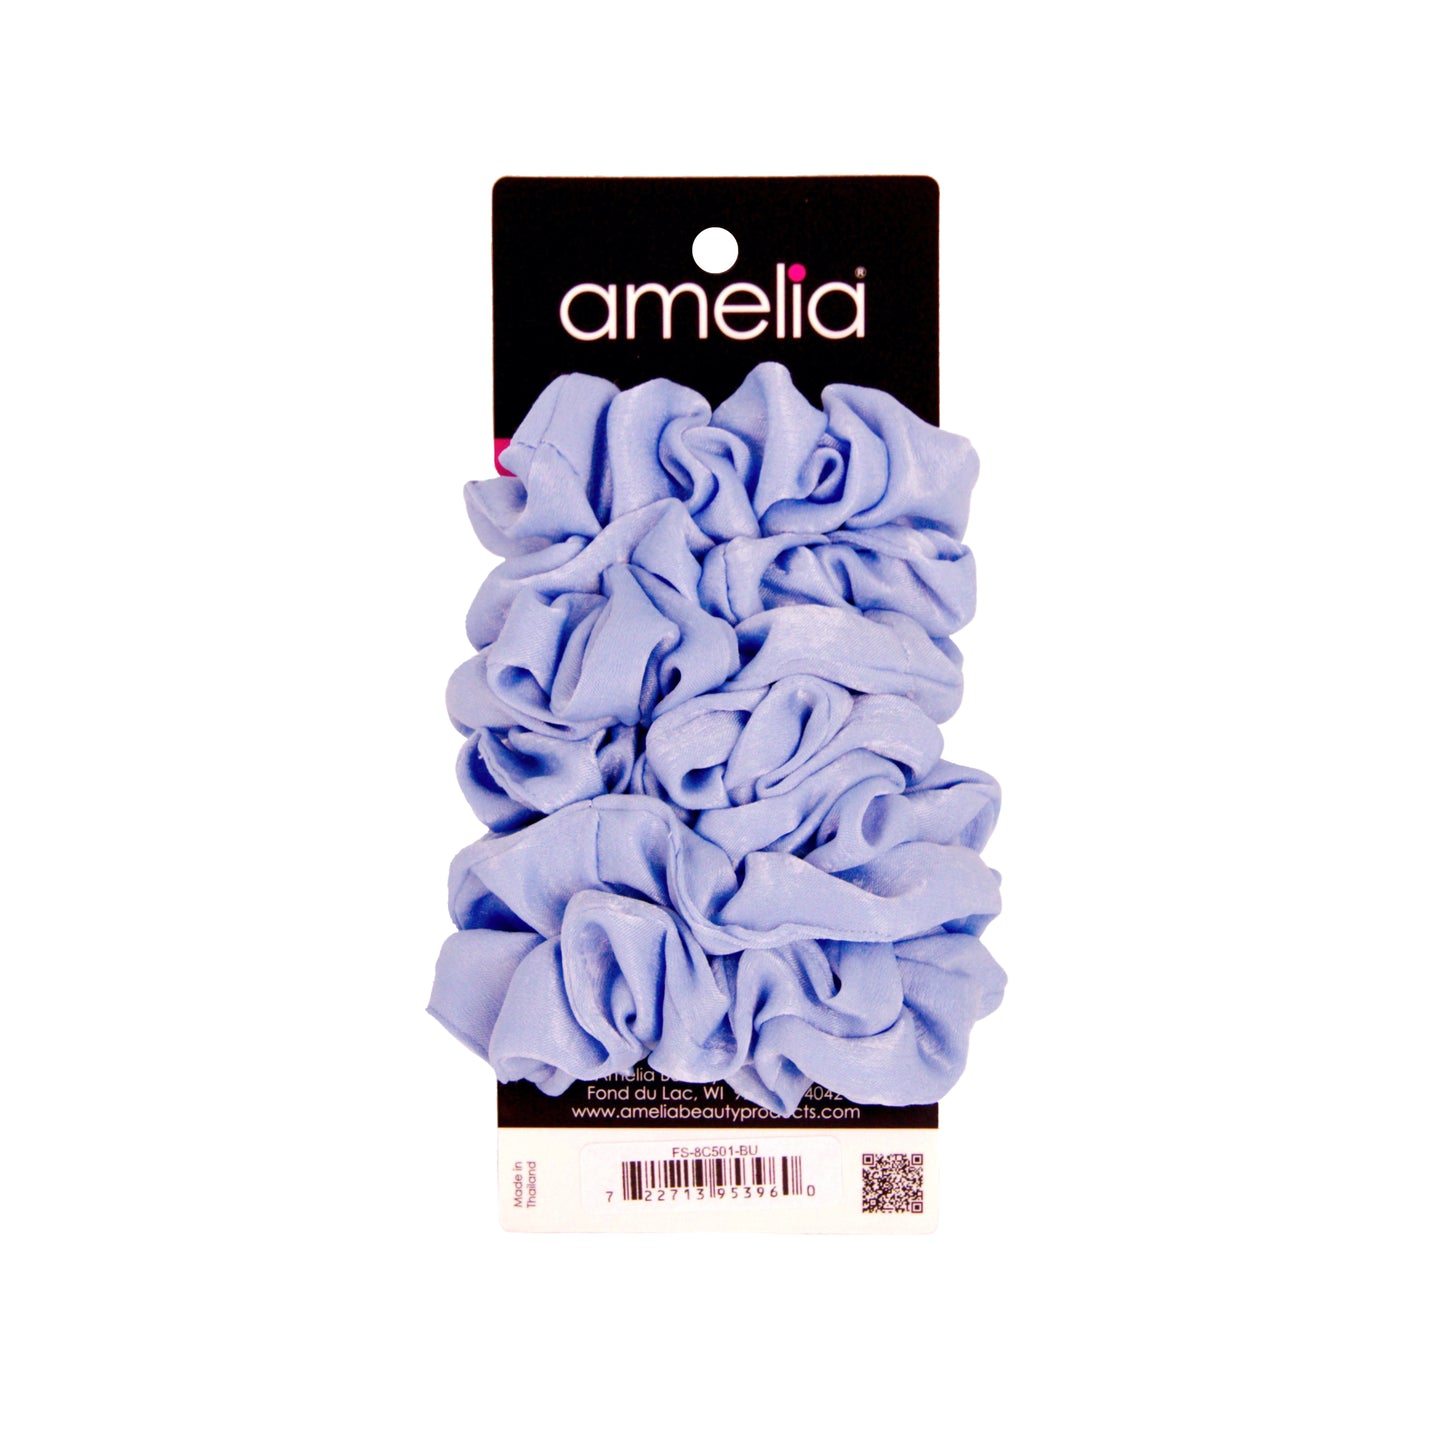 Amelia Beauty | 3in Blue Crepe Scrunchies | Soft, Gentle and Strong Hold | No Snag, No Dents or Creases | 8 Pack